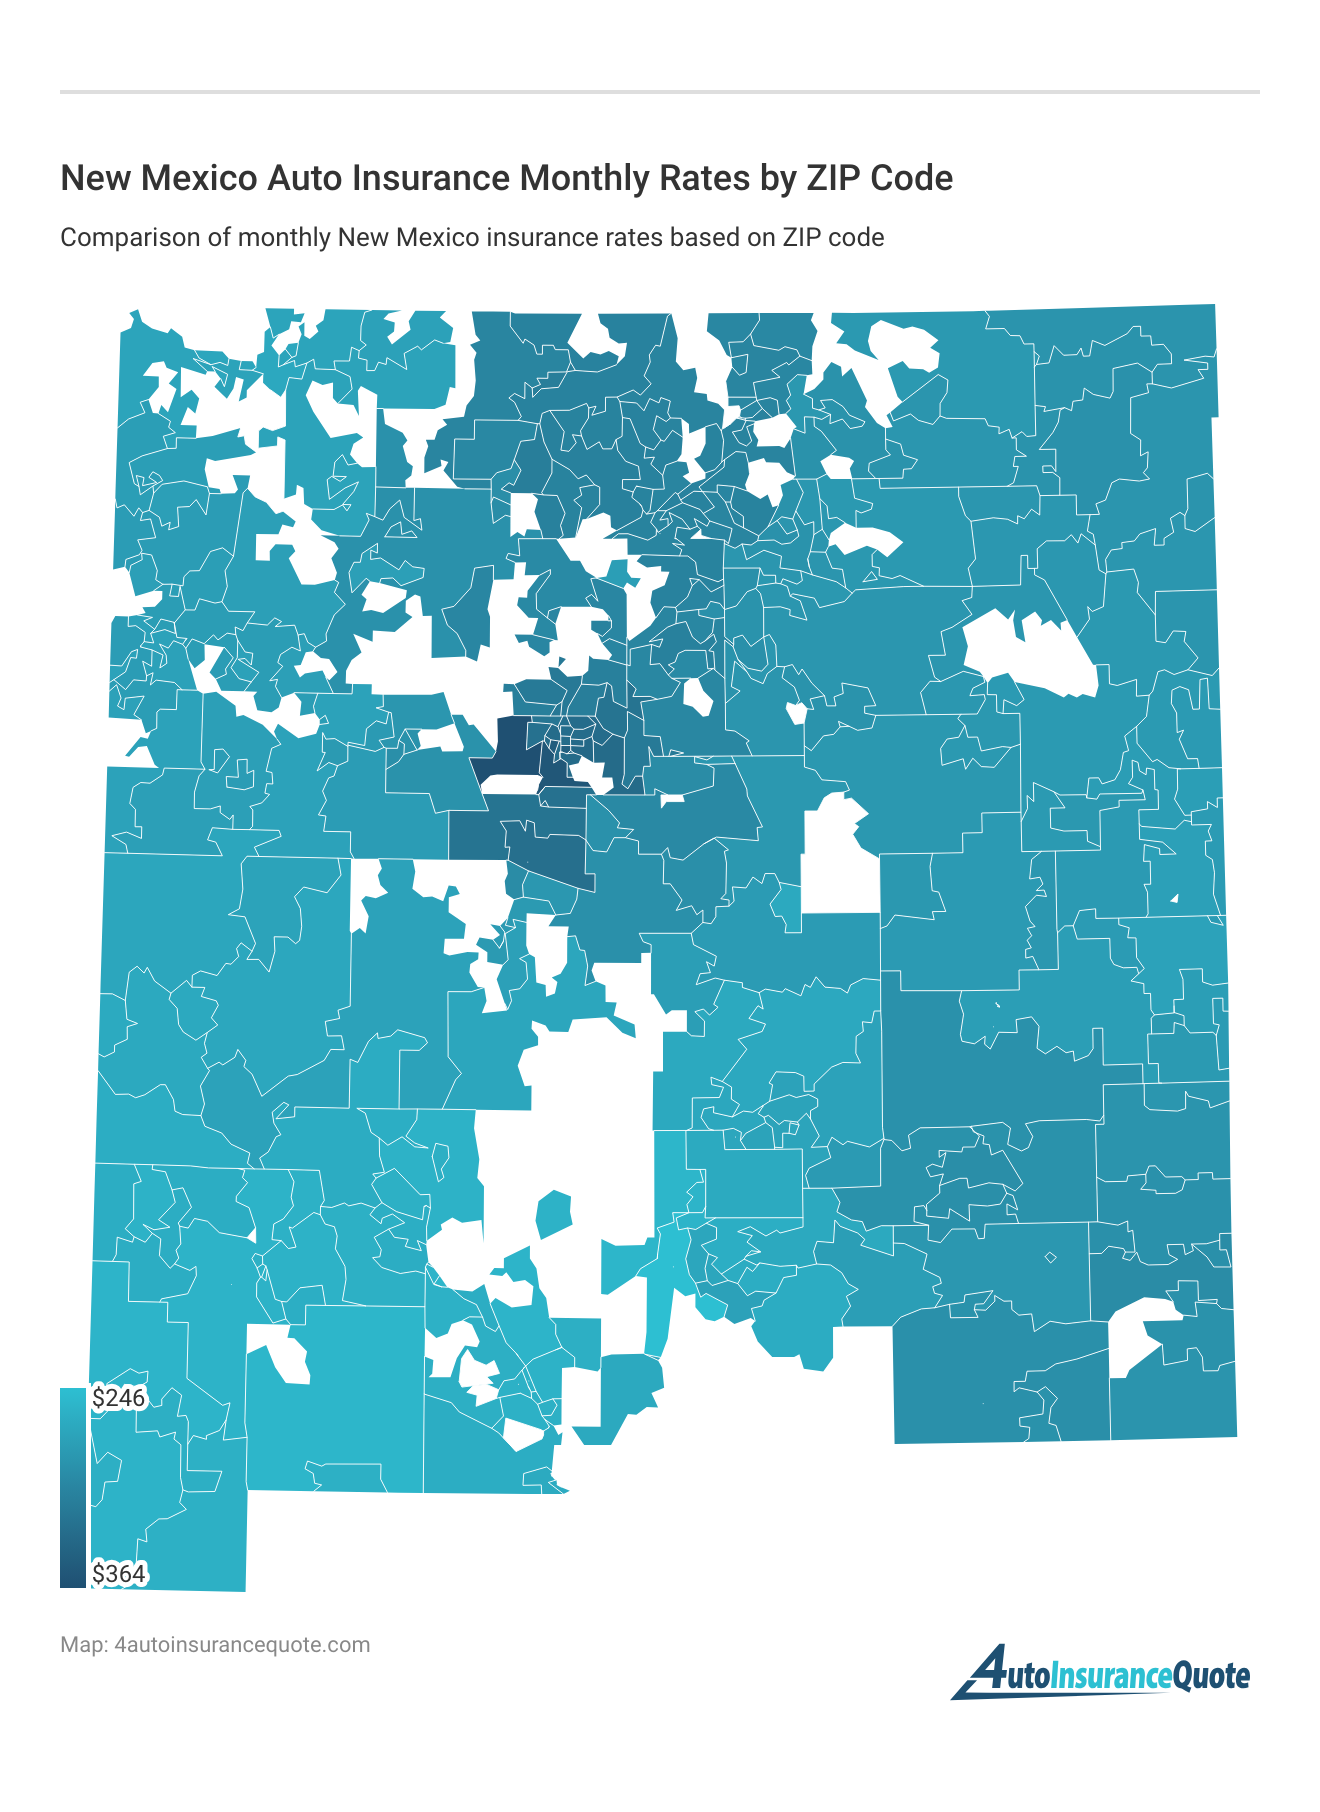 <h3>New Mexico Auto Insurance Monthly Rates by ZIP Code</h3>